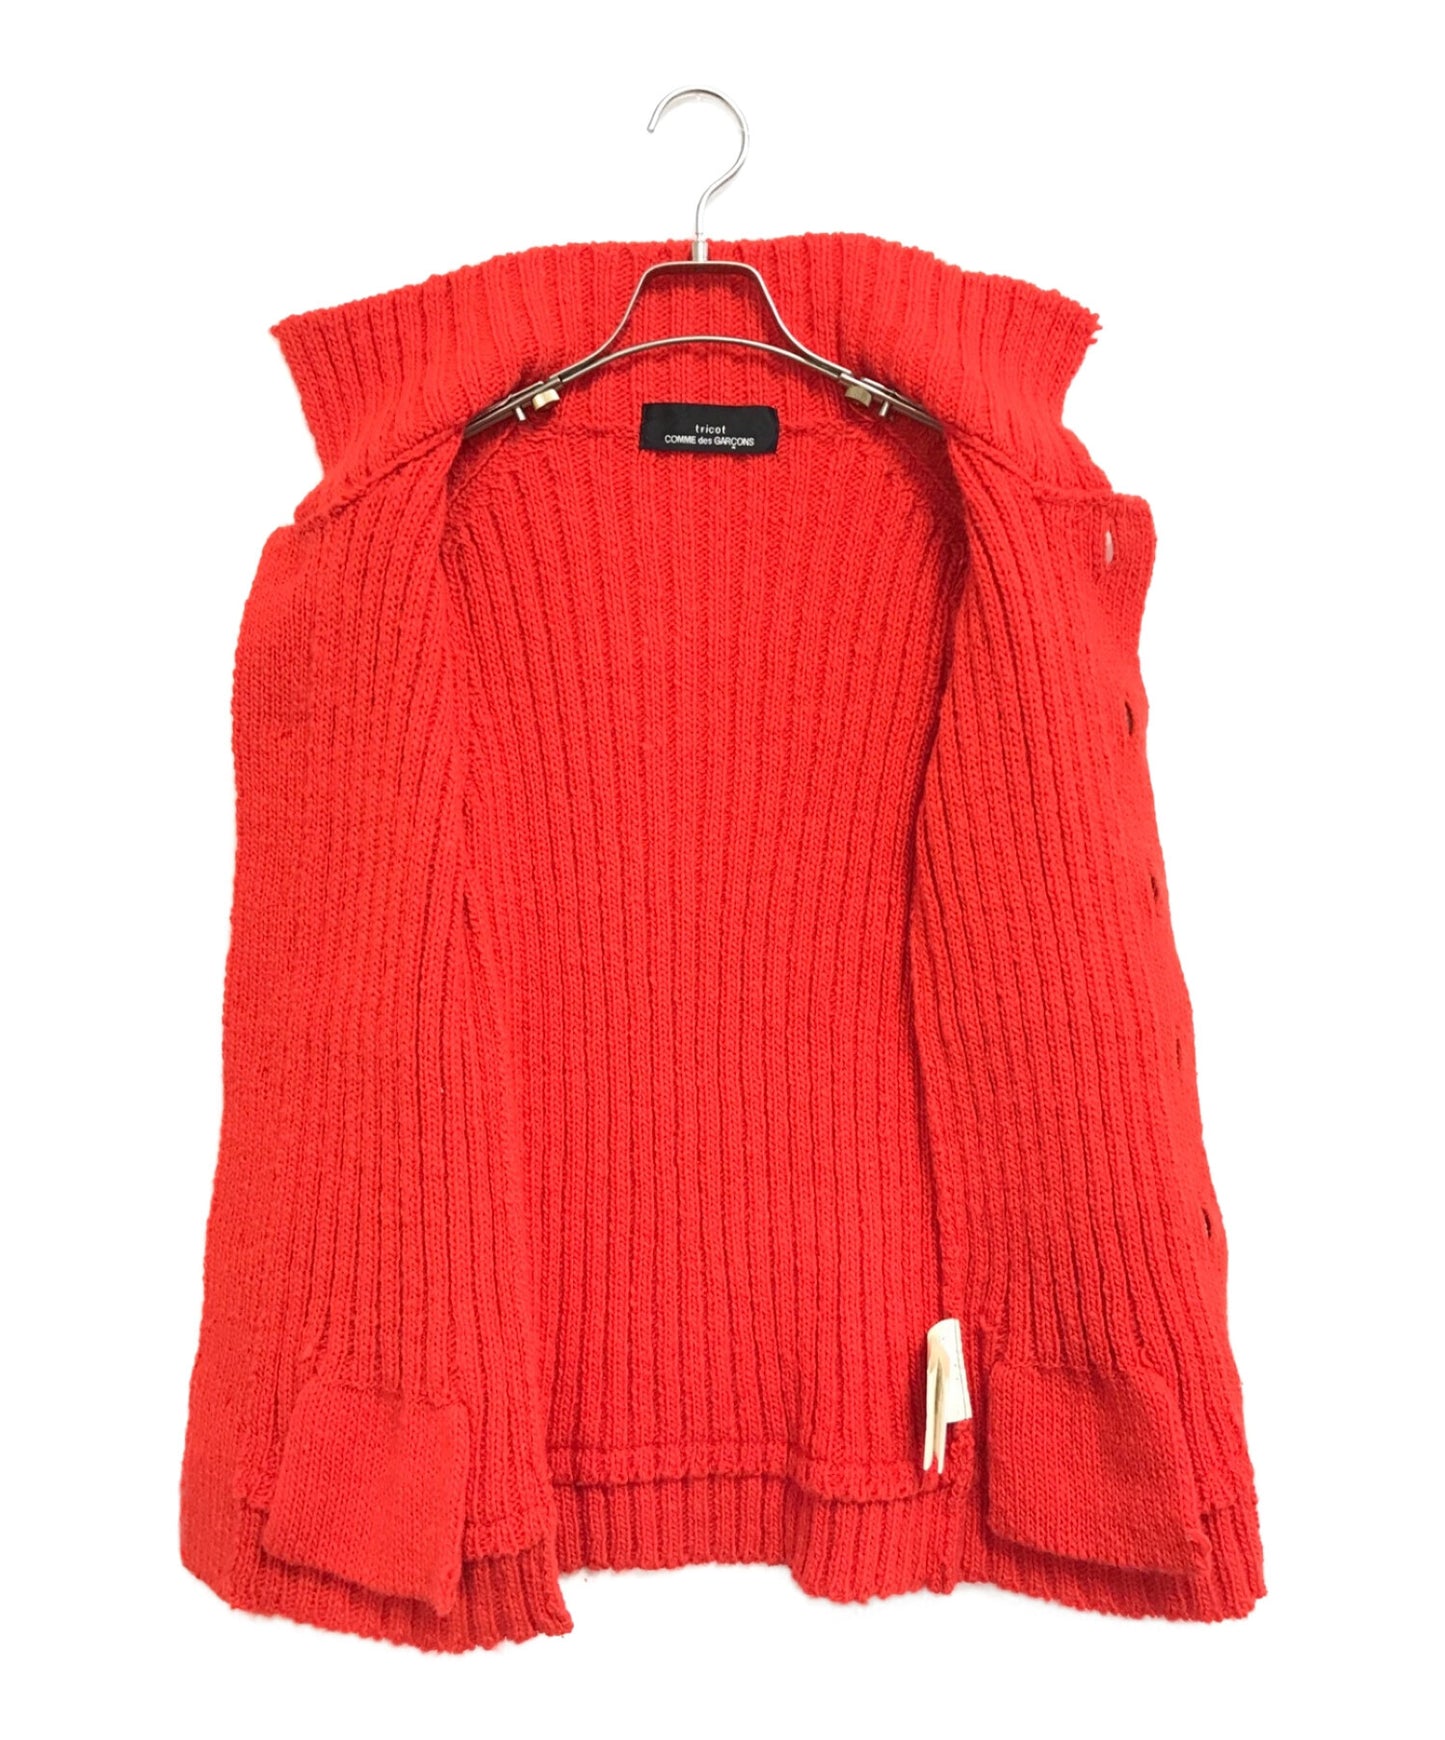 Tricot Comme des Garcons 00的针织开衫TH-N005